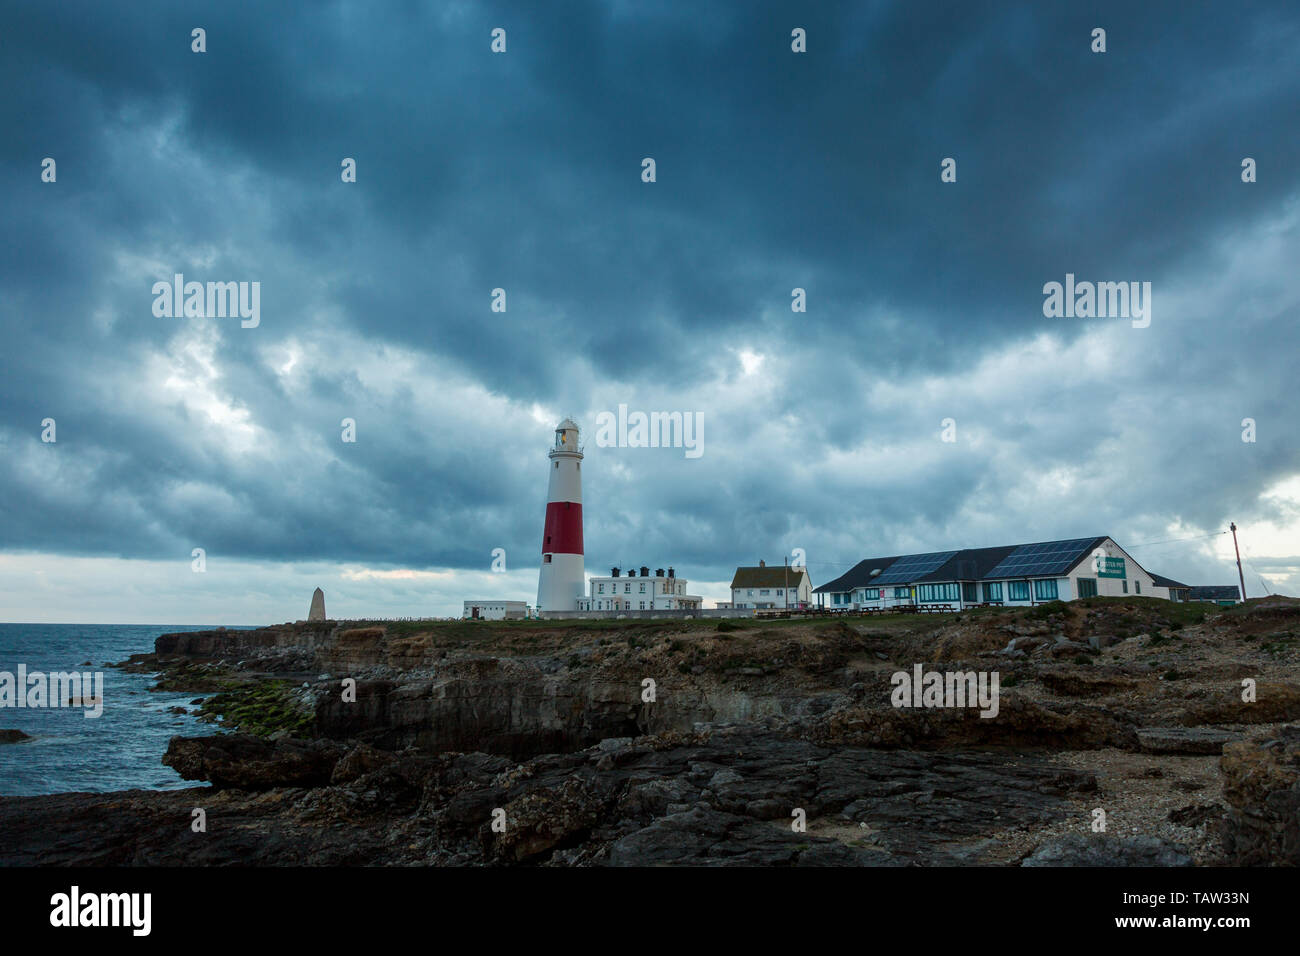 Portland, Dorset, UK. 28th May, 2019. Dramatic rain clouds fill the sky as dawn breaks at Portland Bill lighthouse, Dorset. The cloud and sun begin a day of unsettled weather. Peter Lopeman/Alamy Live News Stock Photo